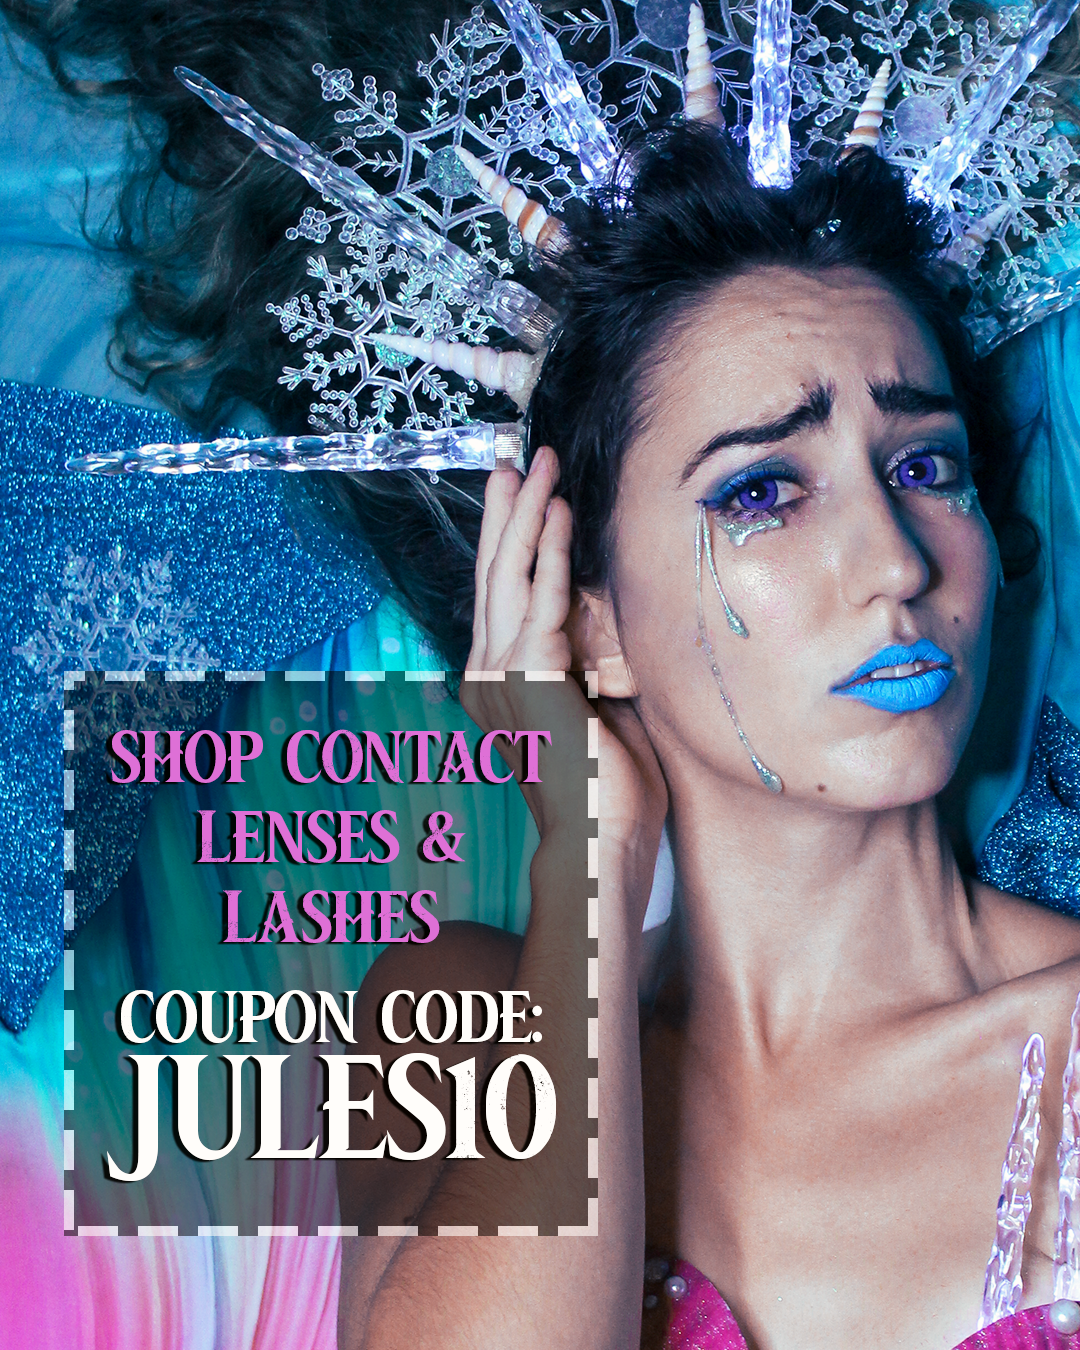 VEECEE Beauty coupon code for 10% discount on color contact lenses: JULES10